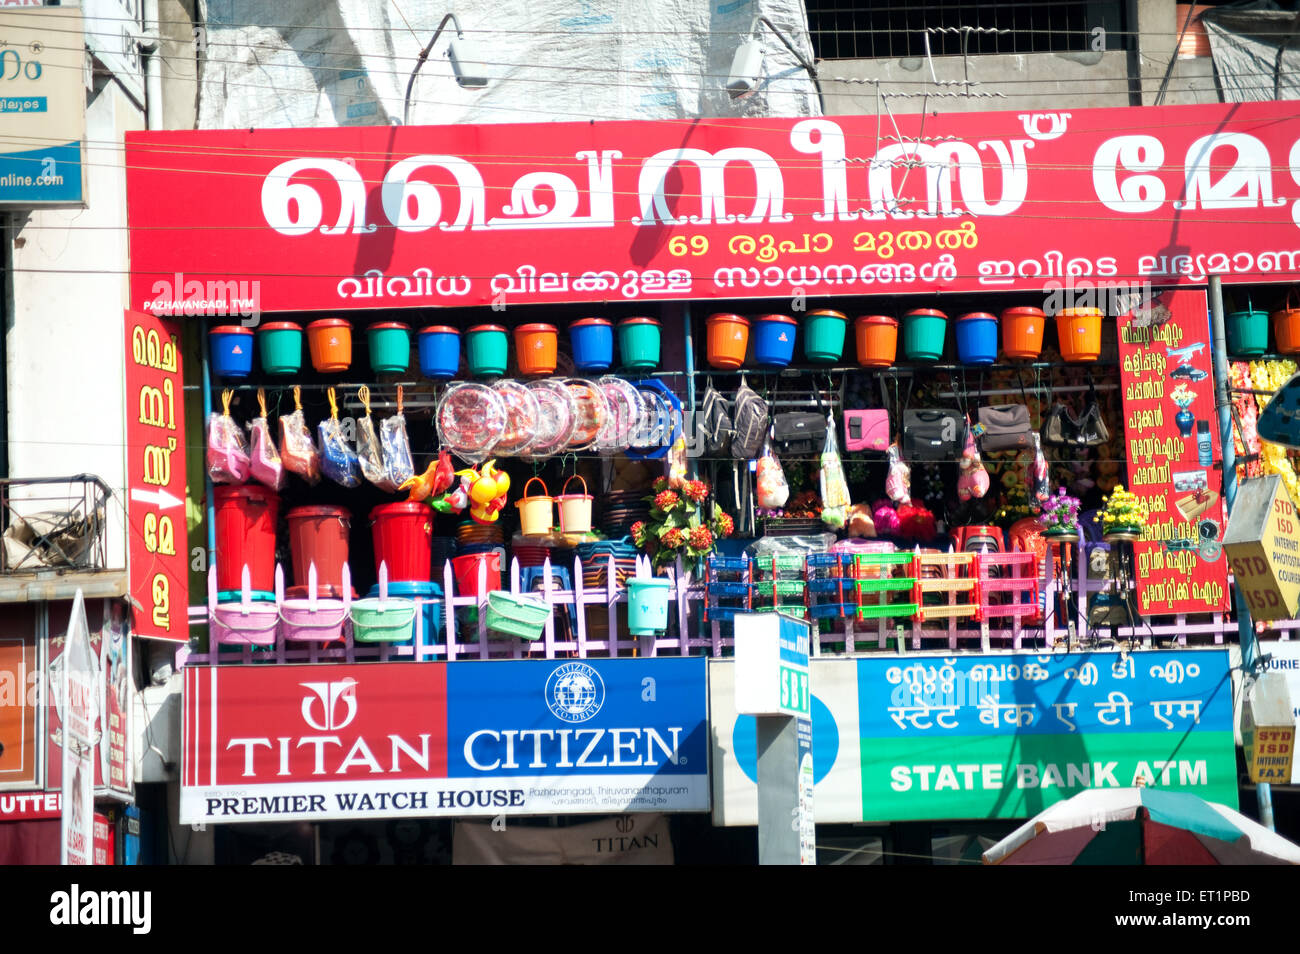 Shop selling plastic products ; Titan watches ; Citizen watches ; State Bank ATM ; Trivandrum ; Thiruvananthapuram ; Kerala ; India ; Asia Stock Photo